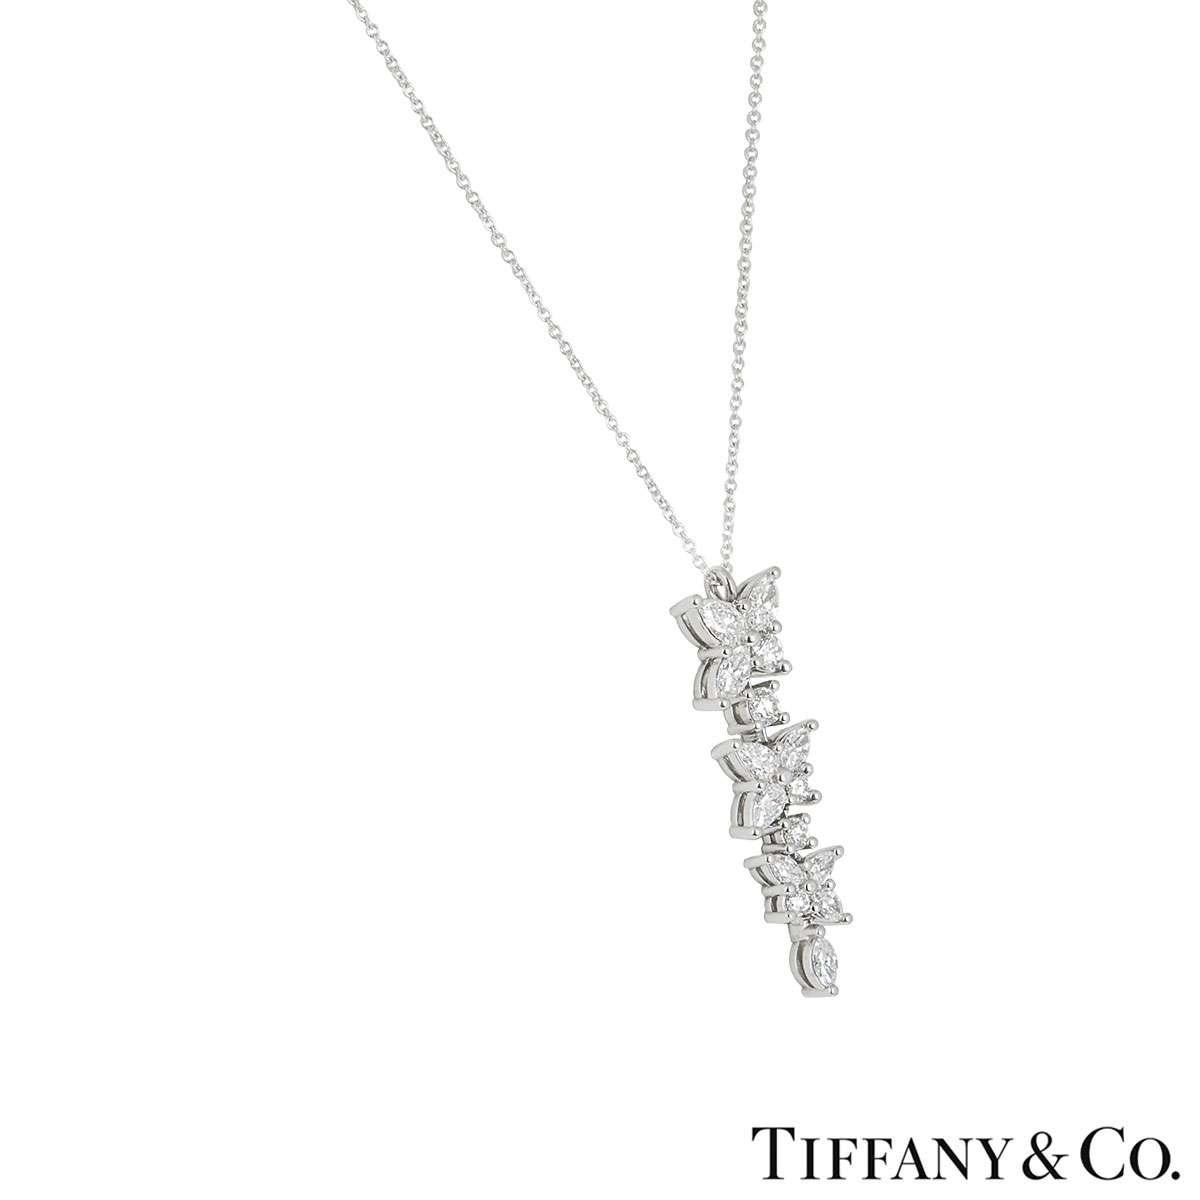 A stunning diamond pendant in platinum from the Victoria collection by Tiffany & Co. The cluster pendant consists of 6 marquise cut diamonds totalling 0.83ct, 4 pear cut diamonds totalling 0.74ct and 5 round brilliant cut diamonds totalling 0.55ct.